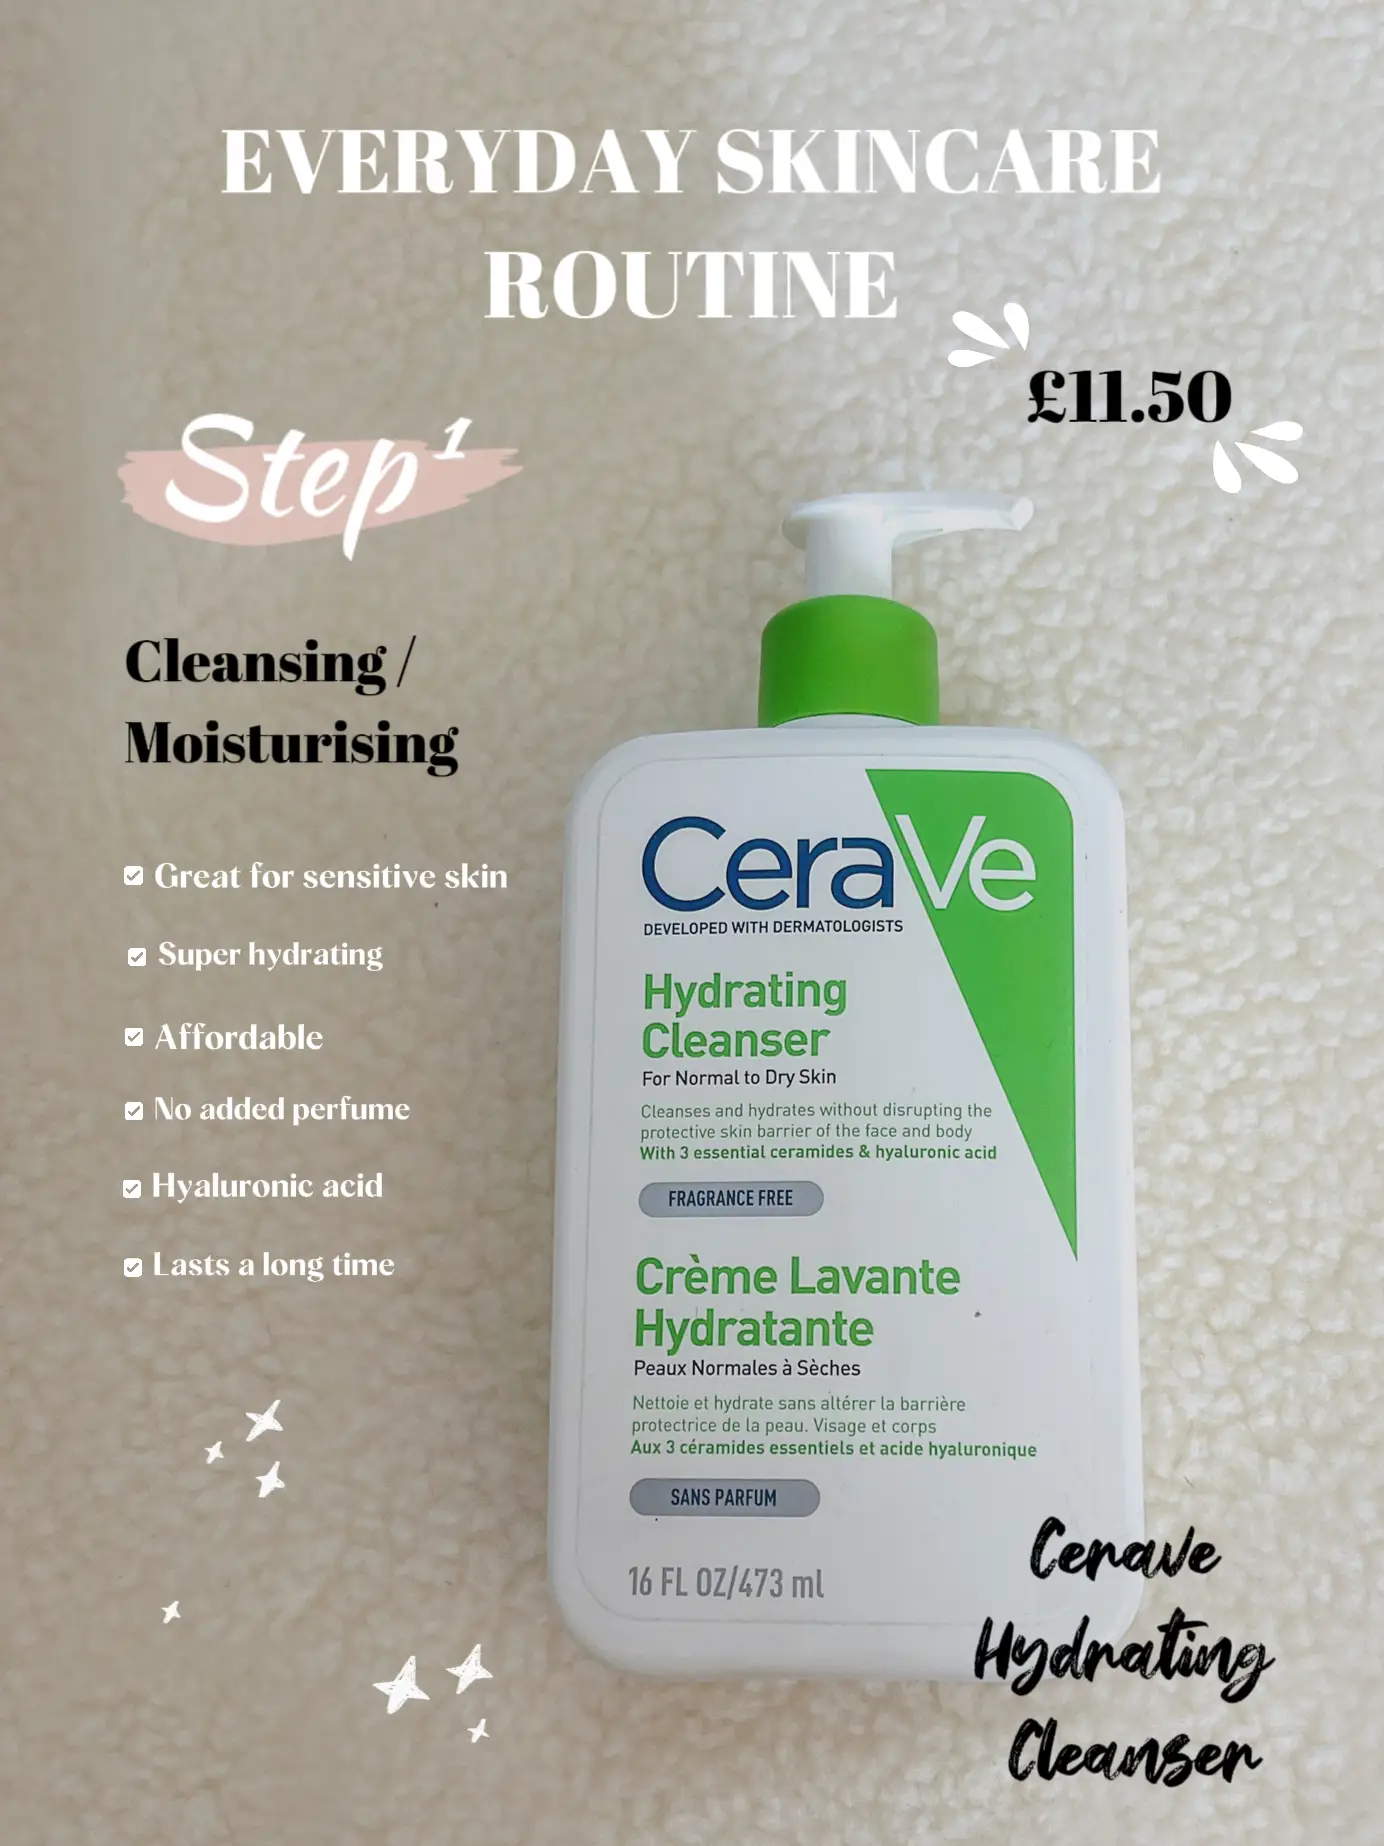 EVERYDAY SKINCARE ROUTINE, Gallery posted by caseyoliverx